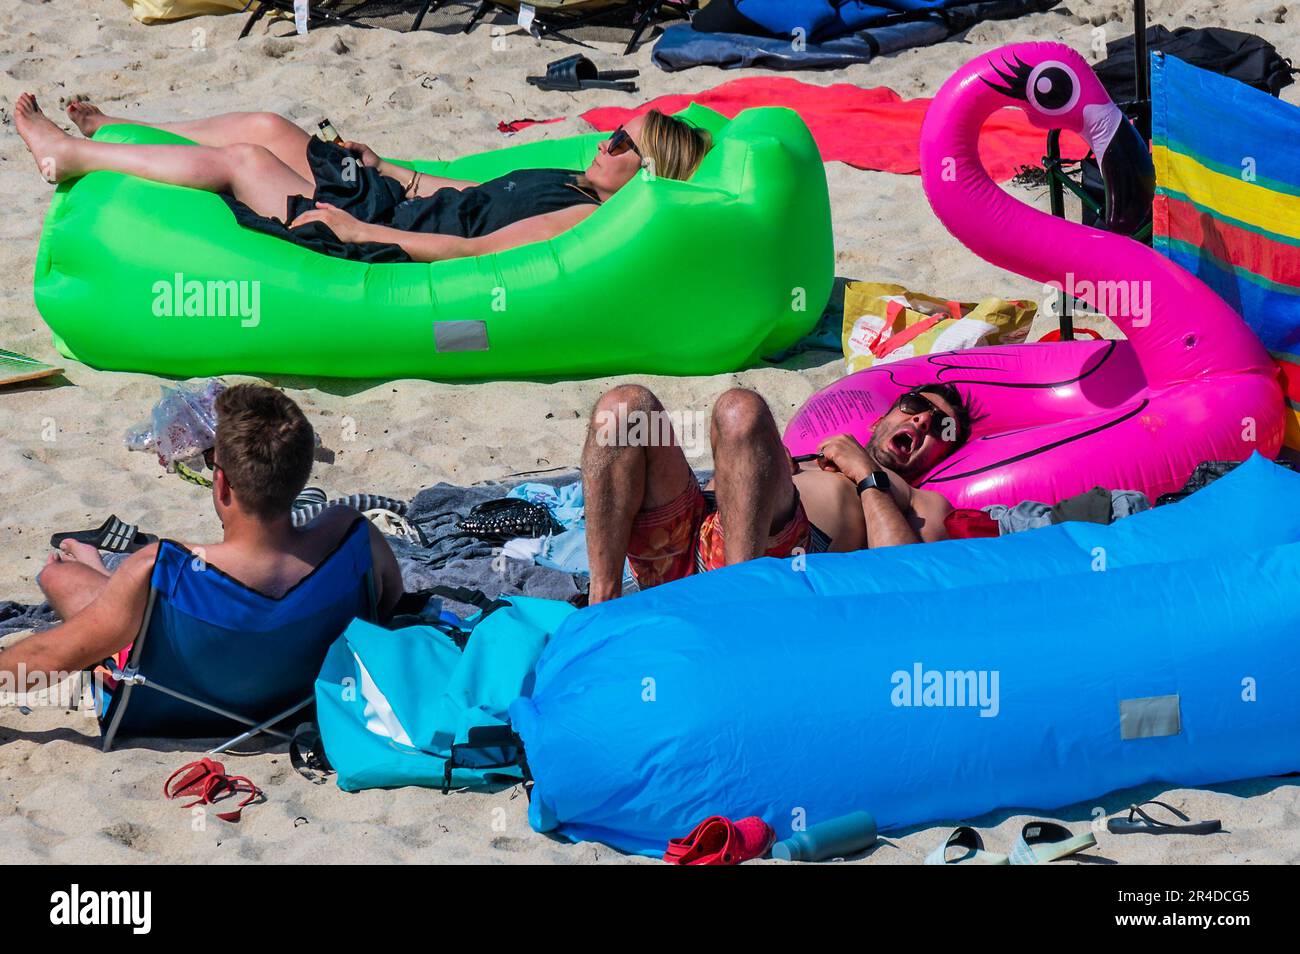 St Ives, UK. 27th May, 2023. Sleeping on a pink flamingo - People flock to the beach to sunbathe as well as take part in watersports and boat trips - Sunny weather for the bank holiday weekend in St Ives. Credit: Guy Bell/Alamy Live News Stock Photo